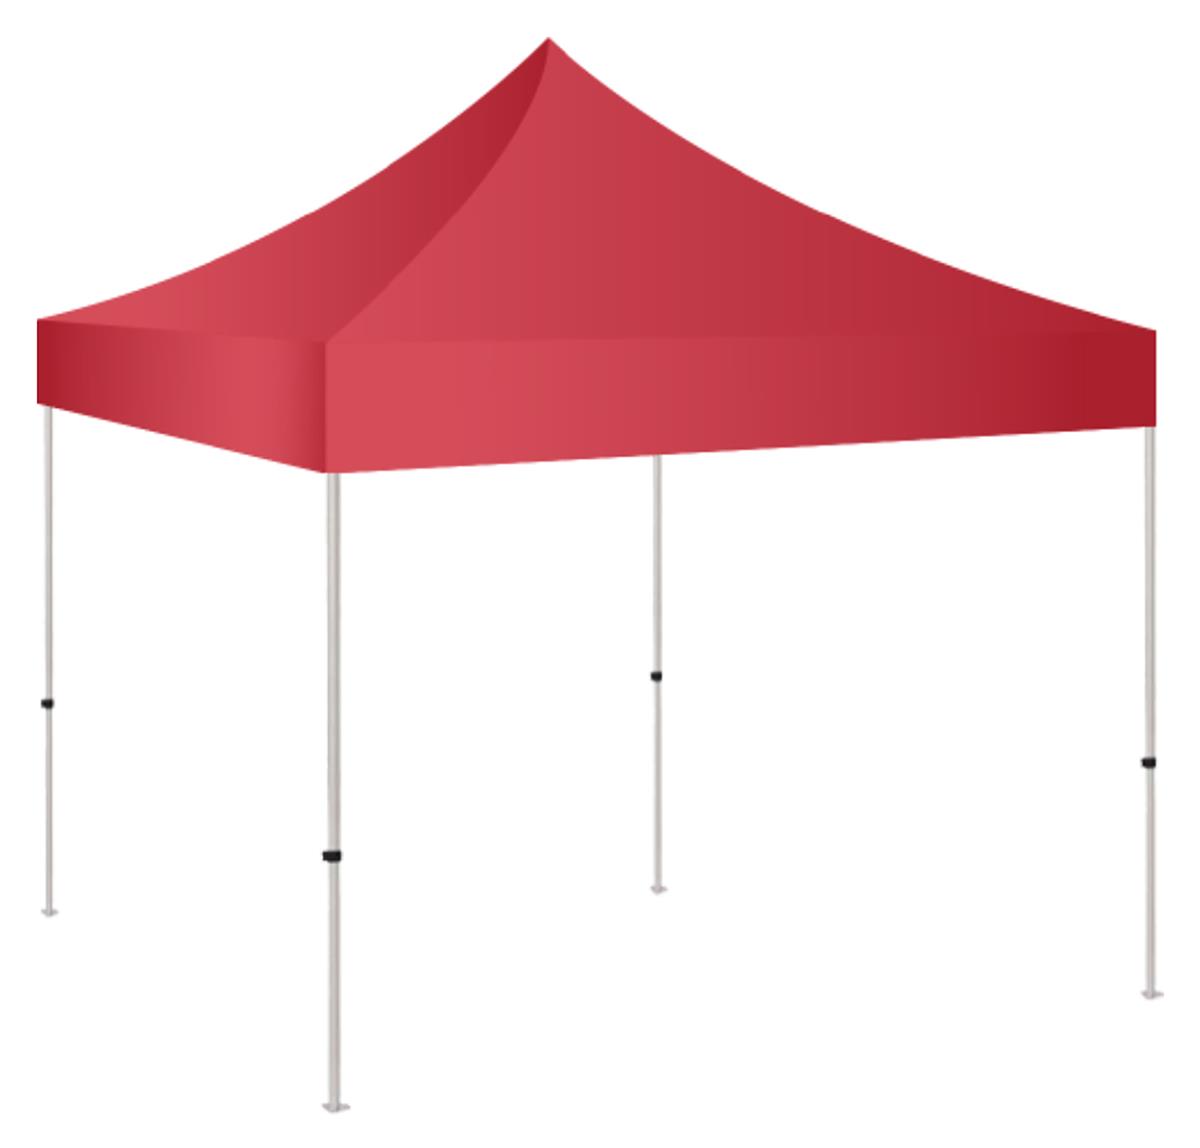 5x5 pop up canopy with fire retardant certification 